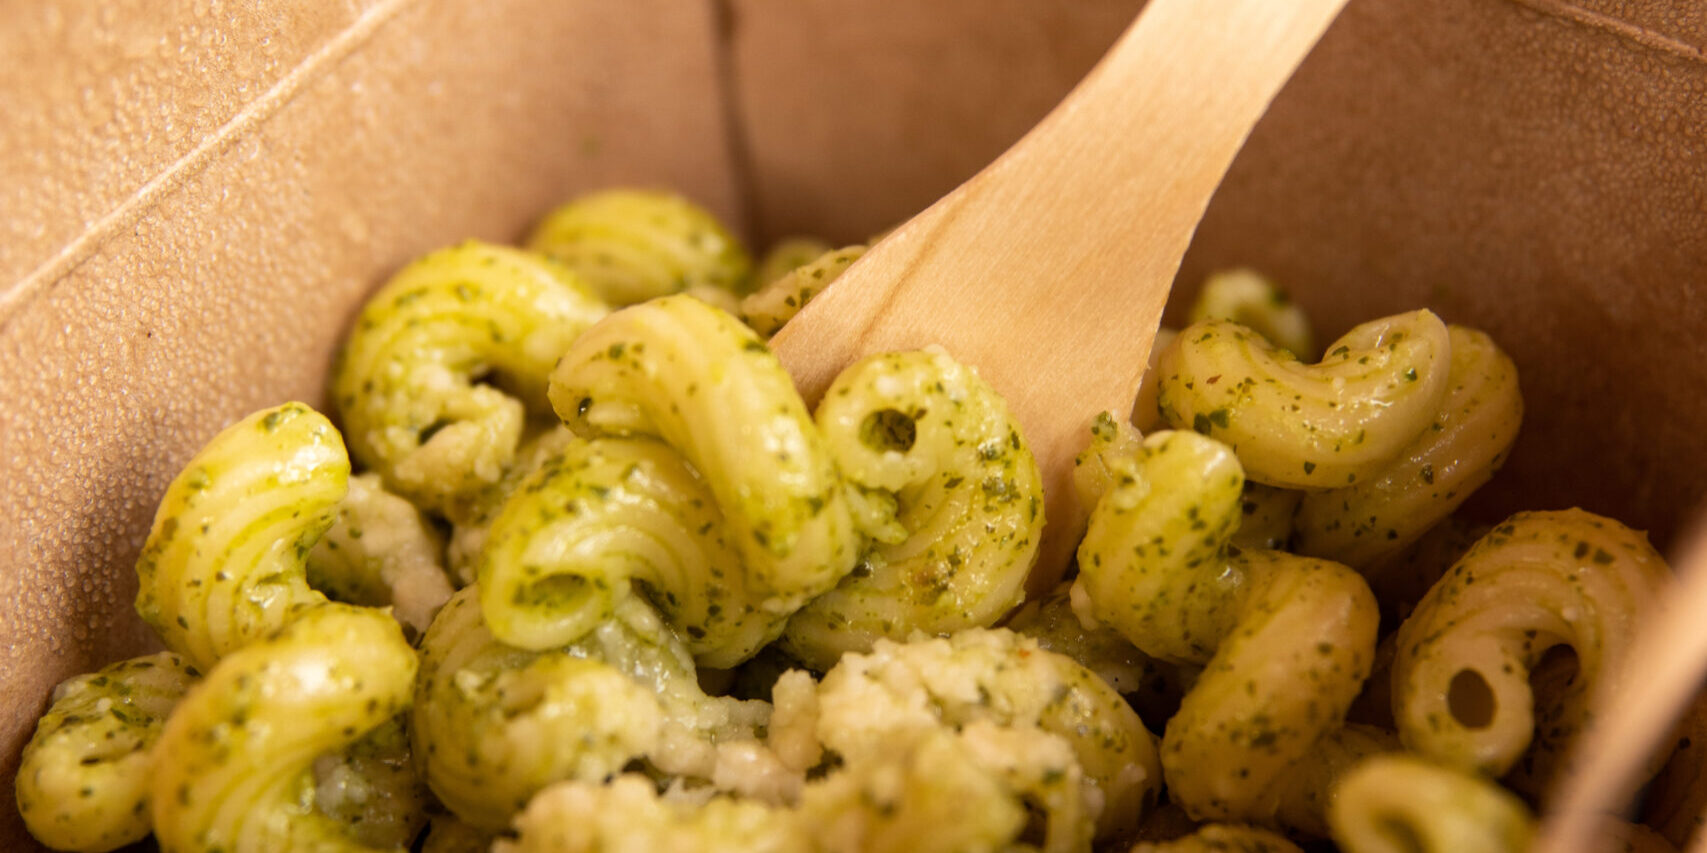 Pesto pasta is served in a compostable container with a compostable wooden fork.